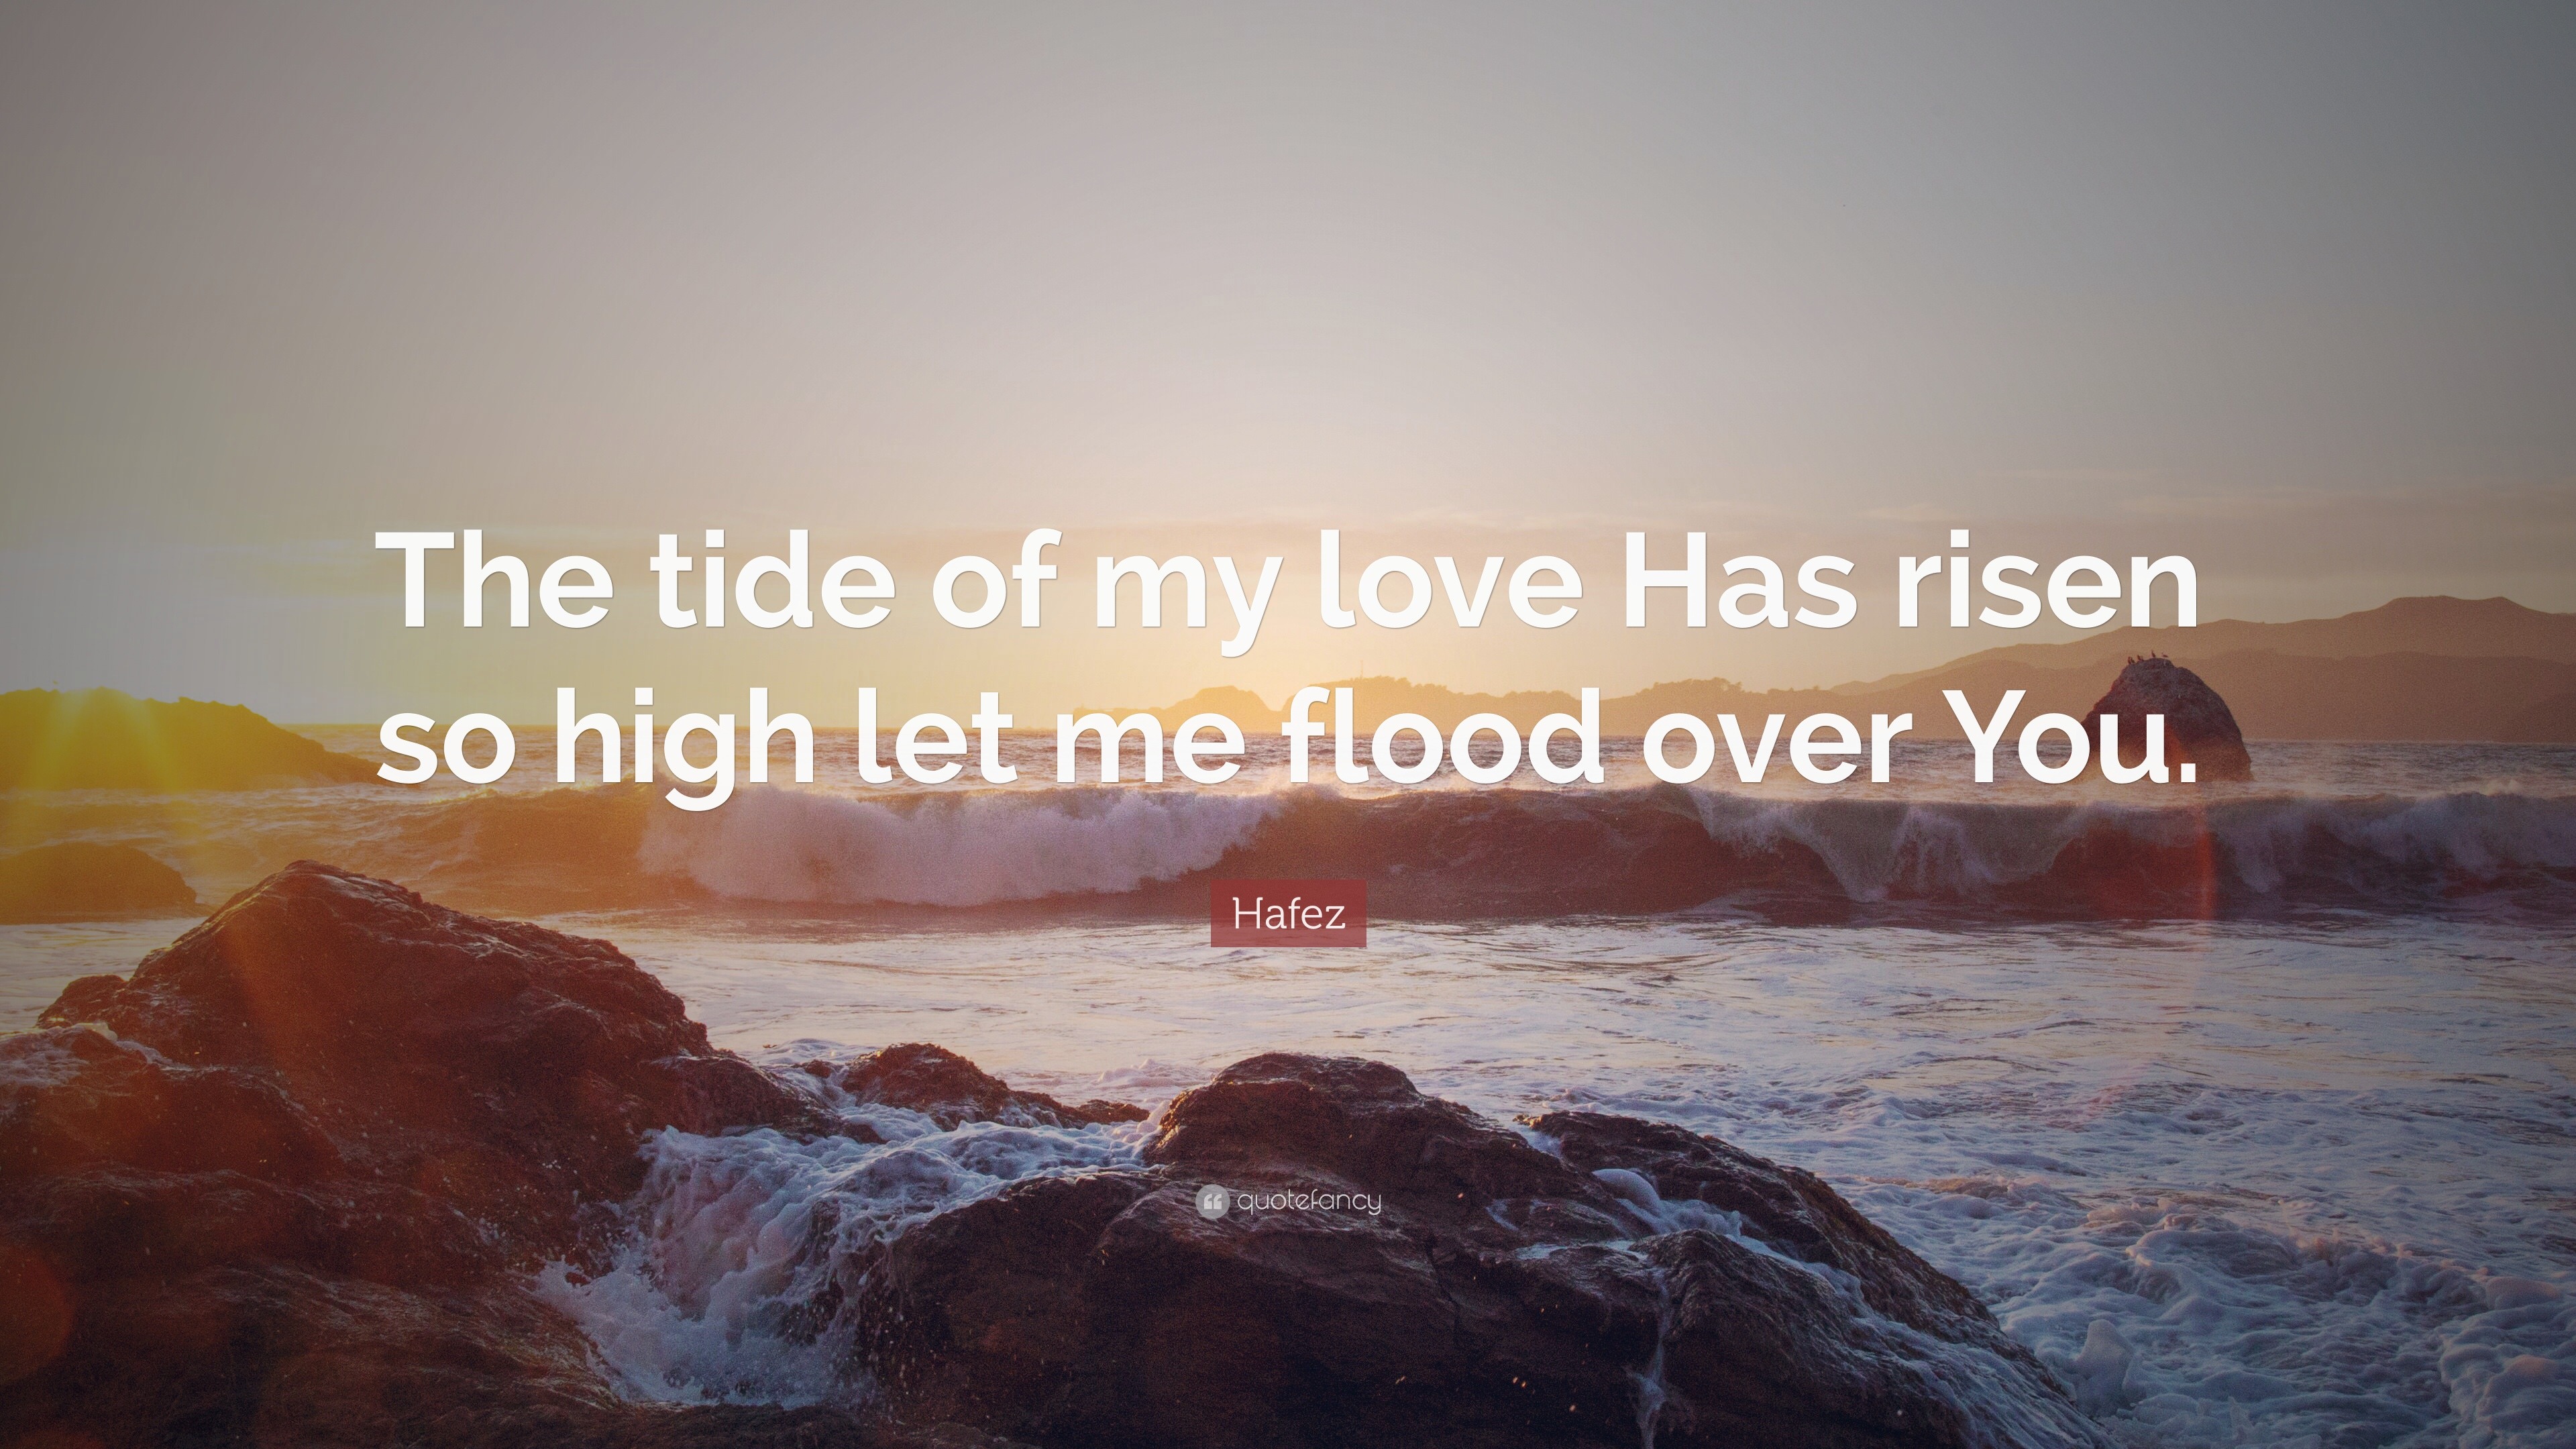 Your love is high like the tide #fyp #foryou #foryoupage #yourloveishi